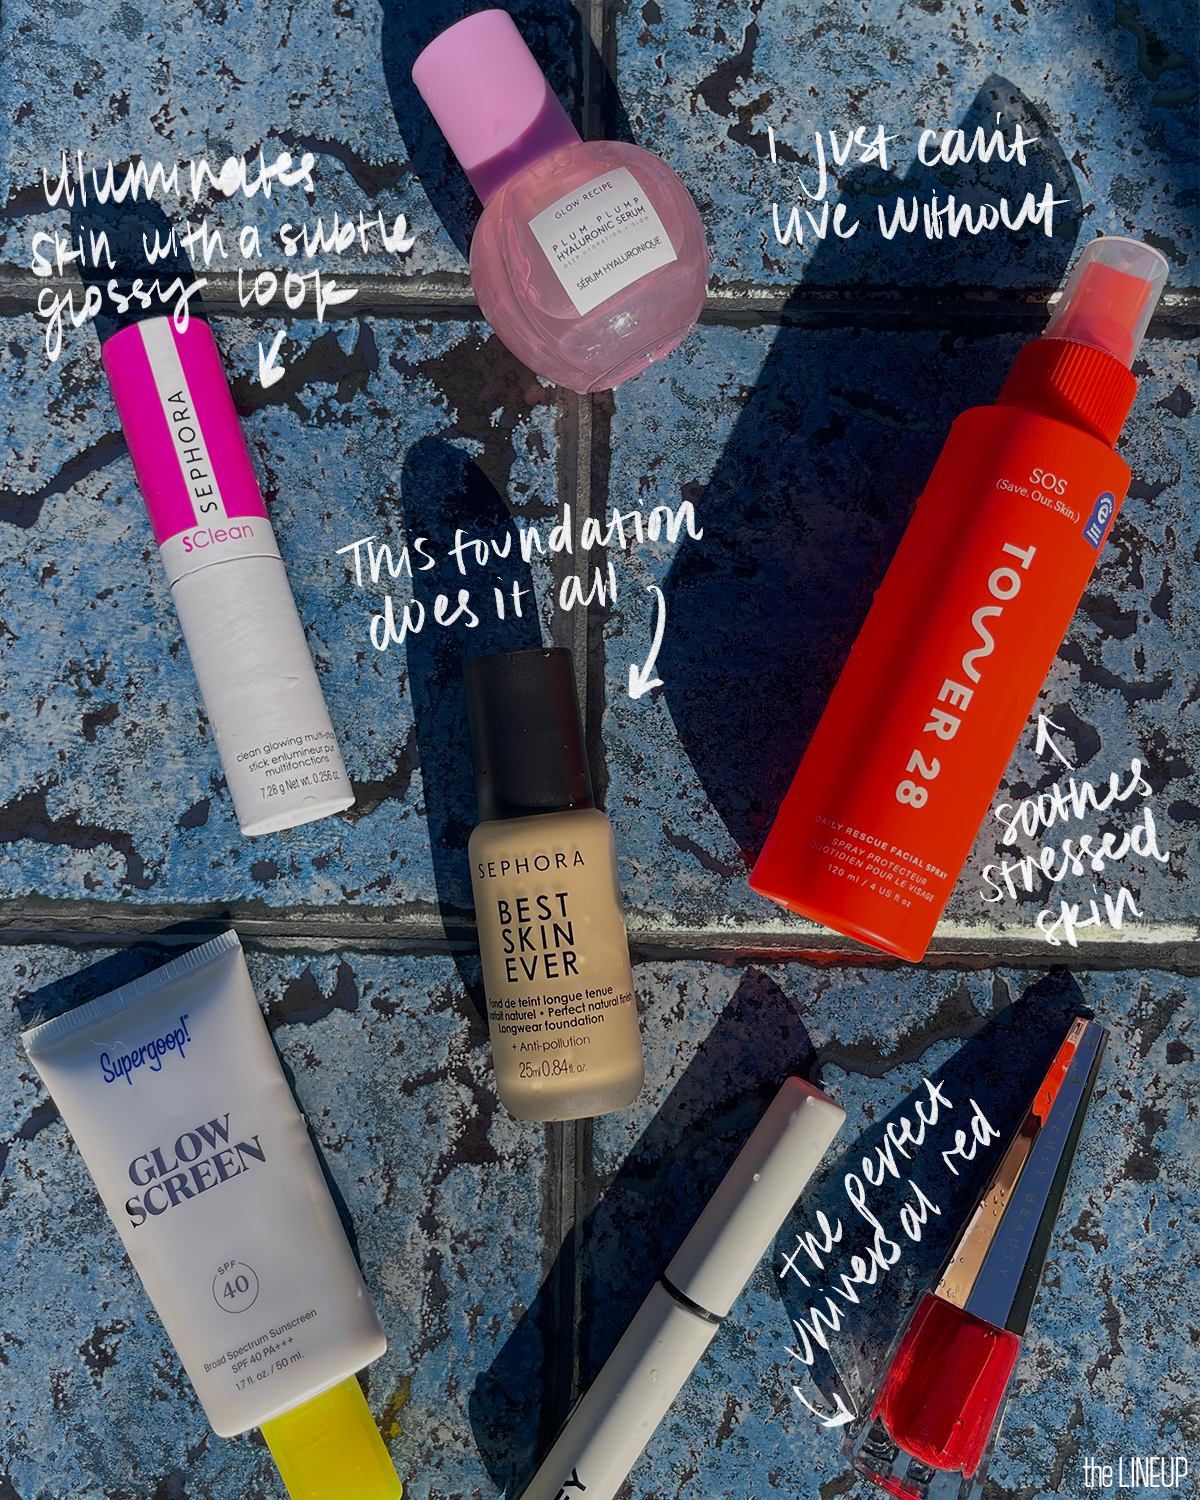 Melinda Solares's favorite beauty products